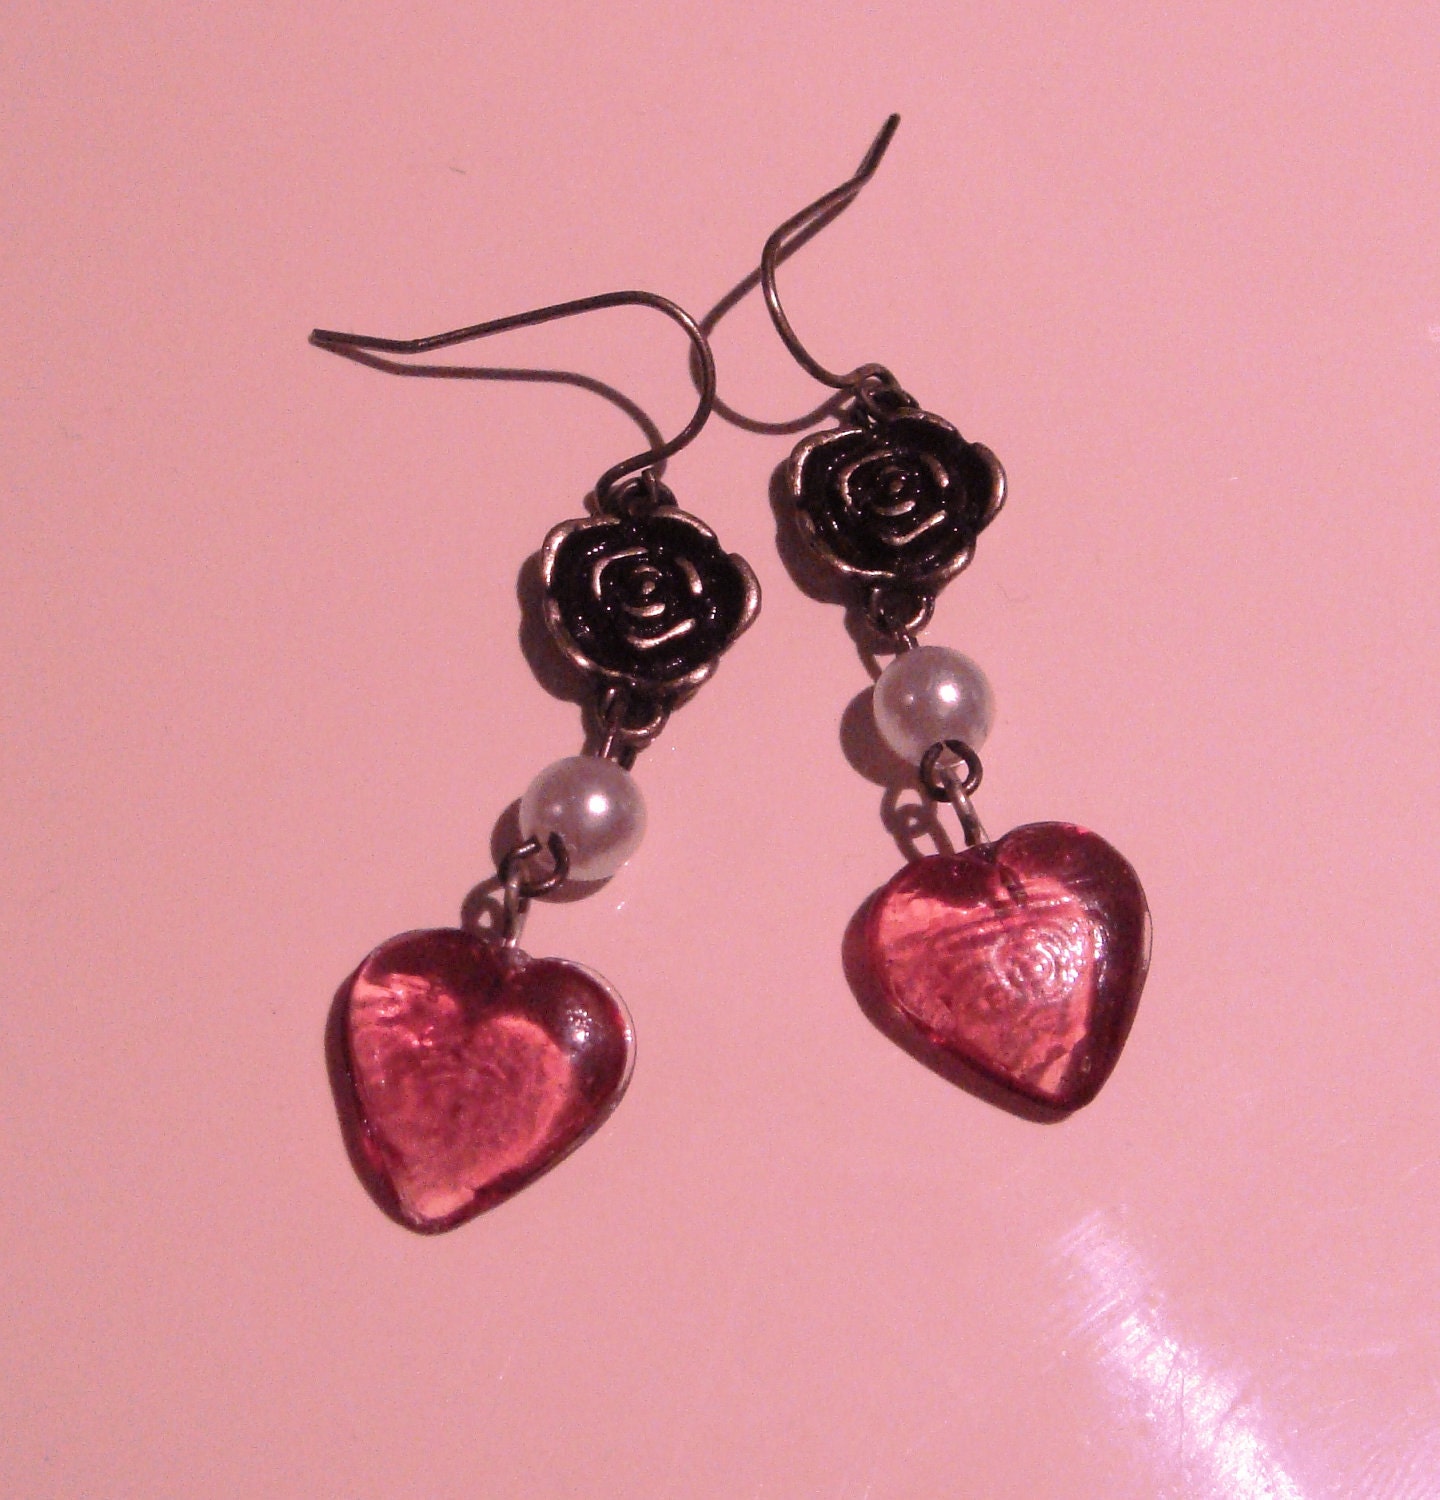 Beauty and the Beast: fairytale earrings with rose charms, faux pearls and glass hearts